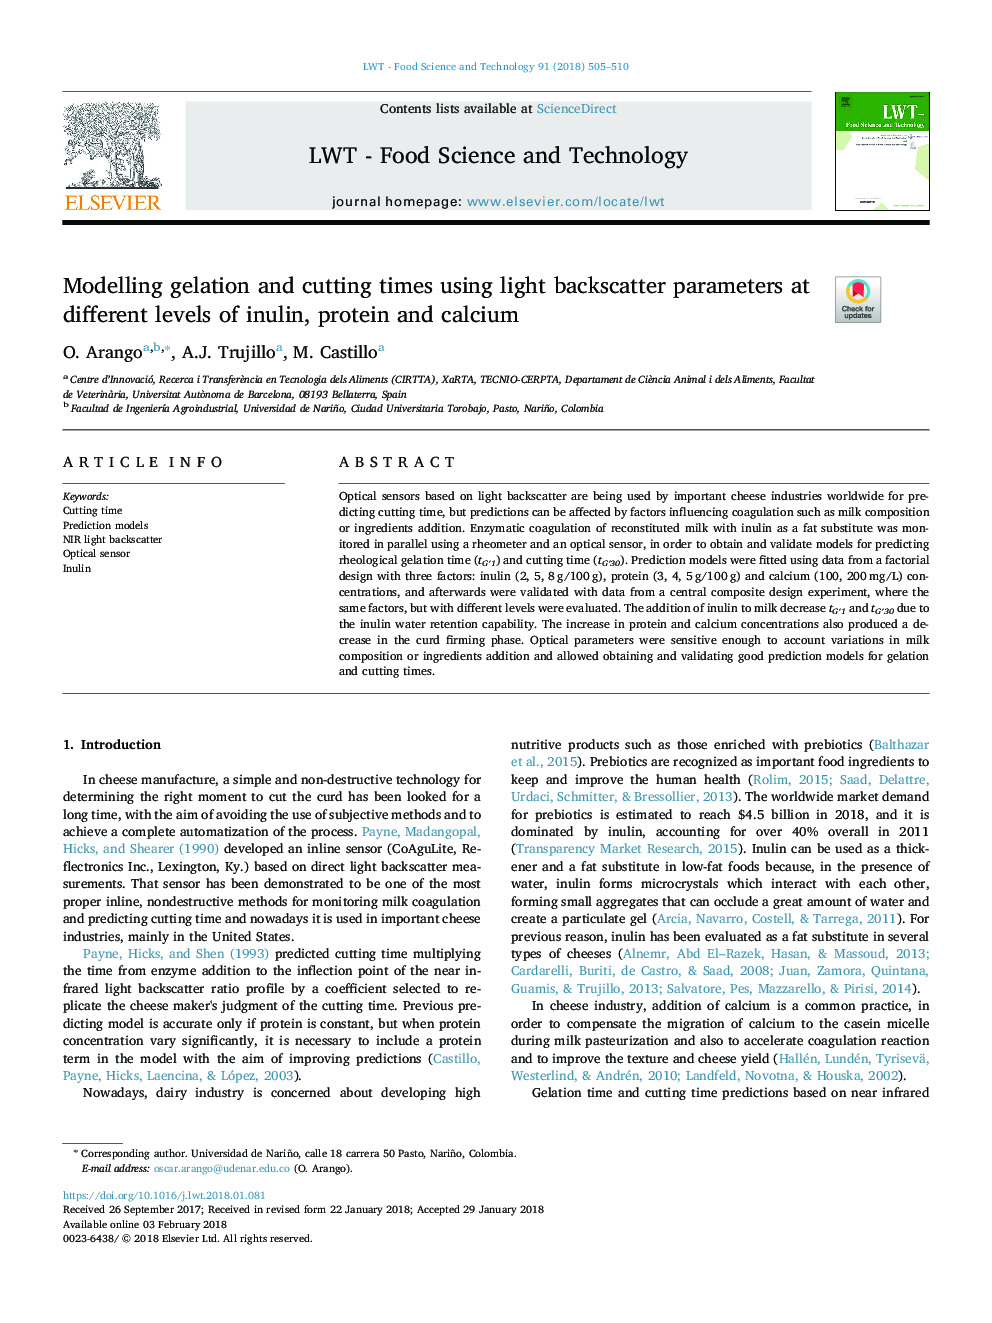 Modelling gelation and cutting times using light backscatter parameters at different levels of inulin, protein and calcium